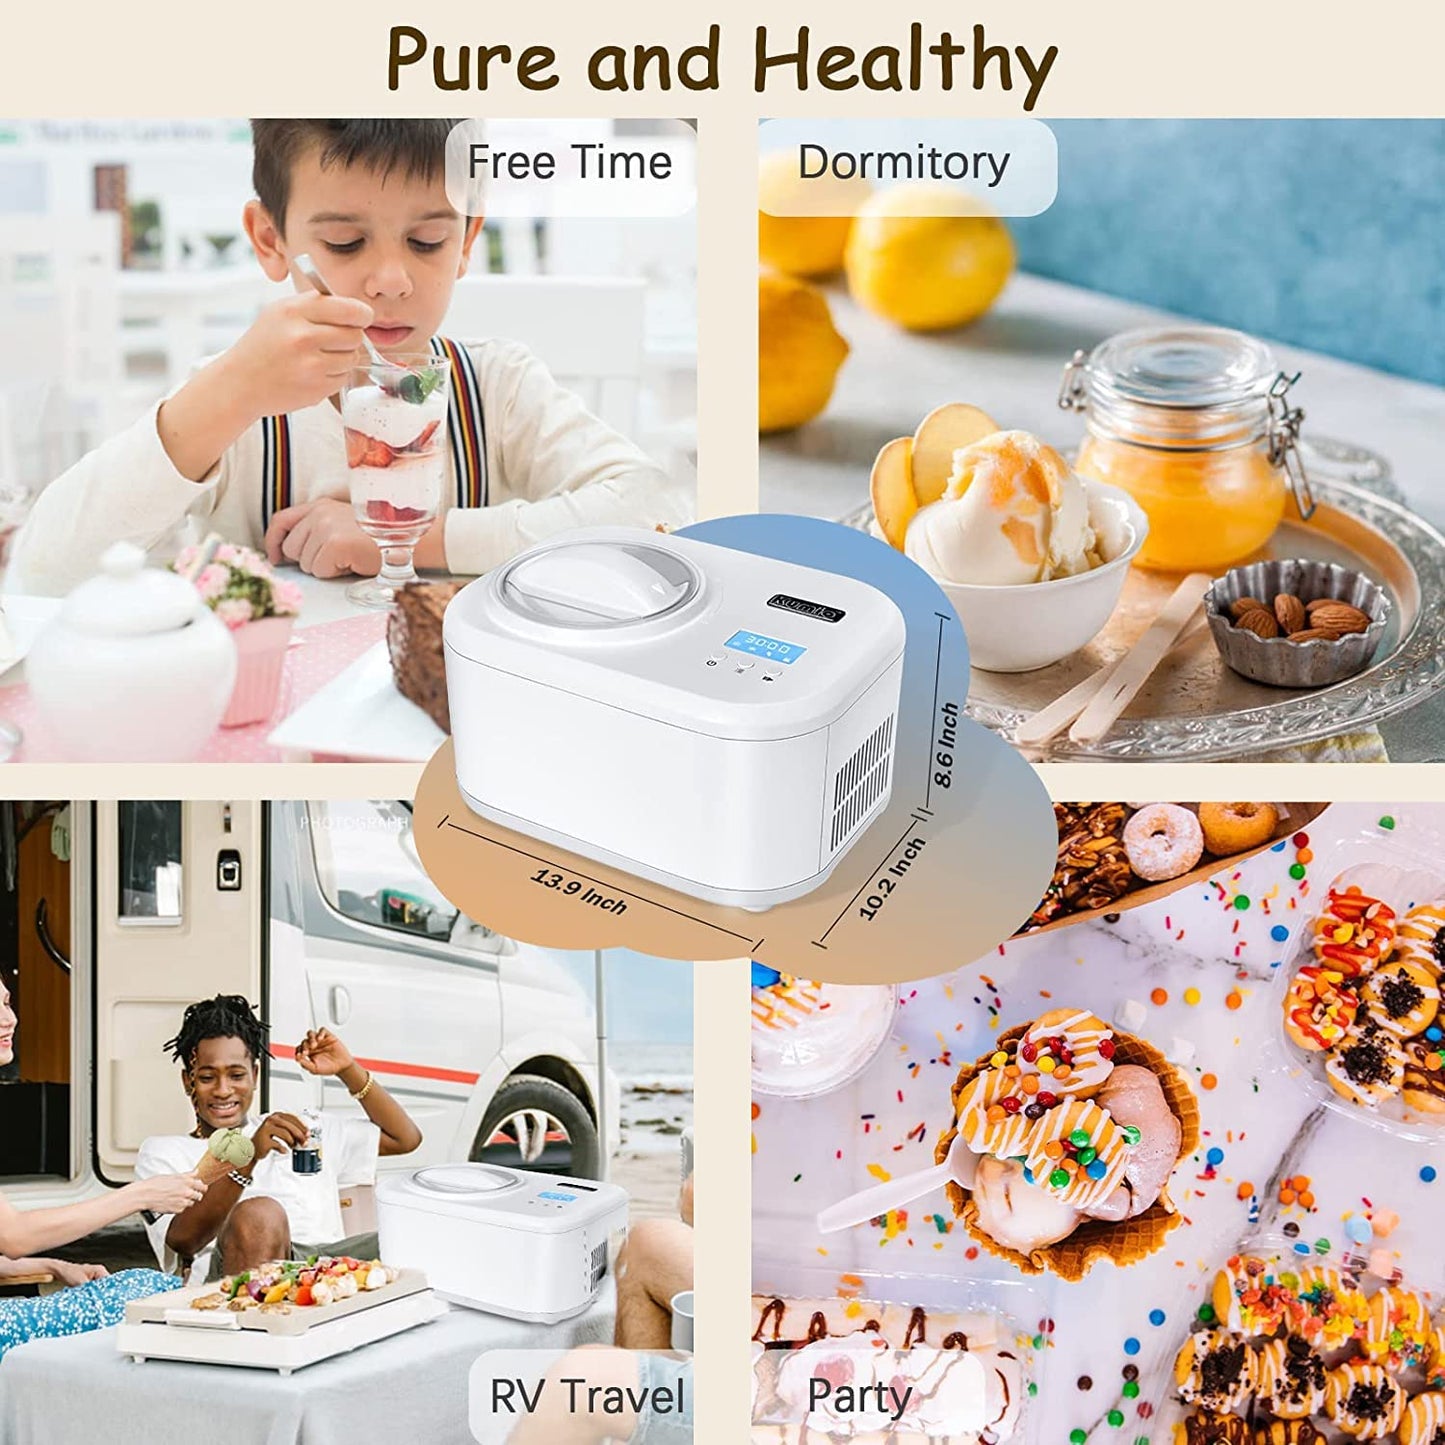 KUMIO Electric Ice Cream Maker with Self-Cooling Compressor, LCD Display and Timer, White